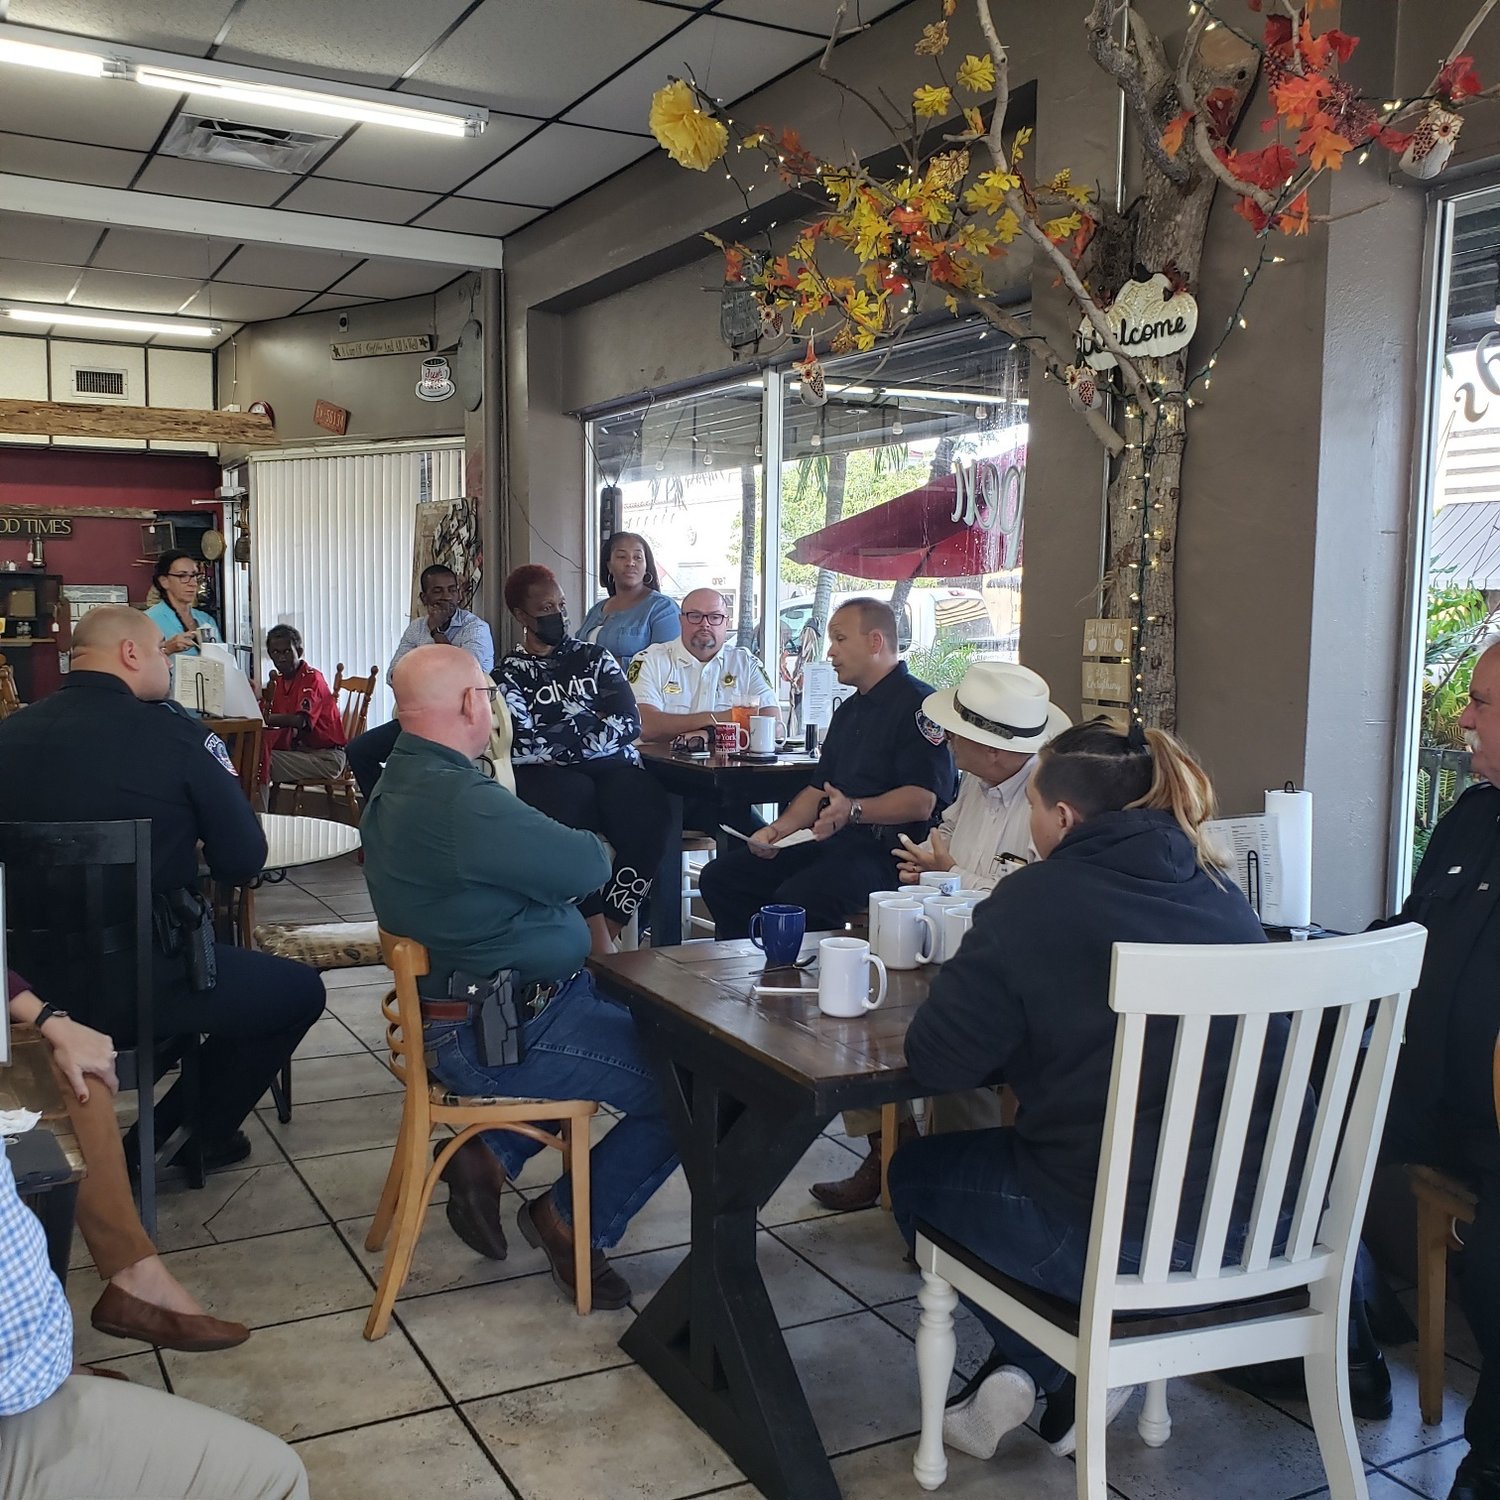 Community members gather at Common Grounds Coffee Shop in Clewiston for the first "Coffee with the Chief" event Sept. 22. Clewiston Interim Police Chief Thomas Lewis explains how the department works and answered questions. The event was coordinated by the Clewiston Chamber of Commerce.